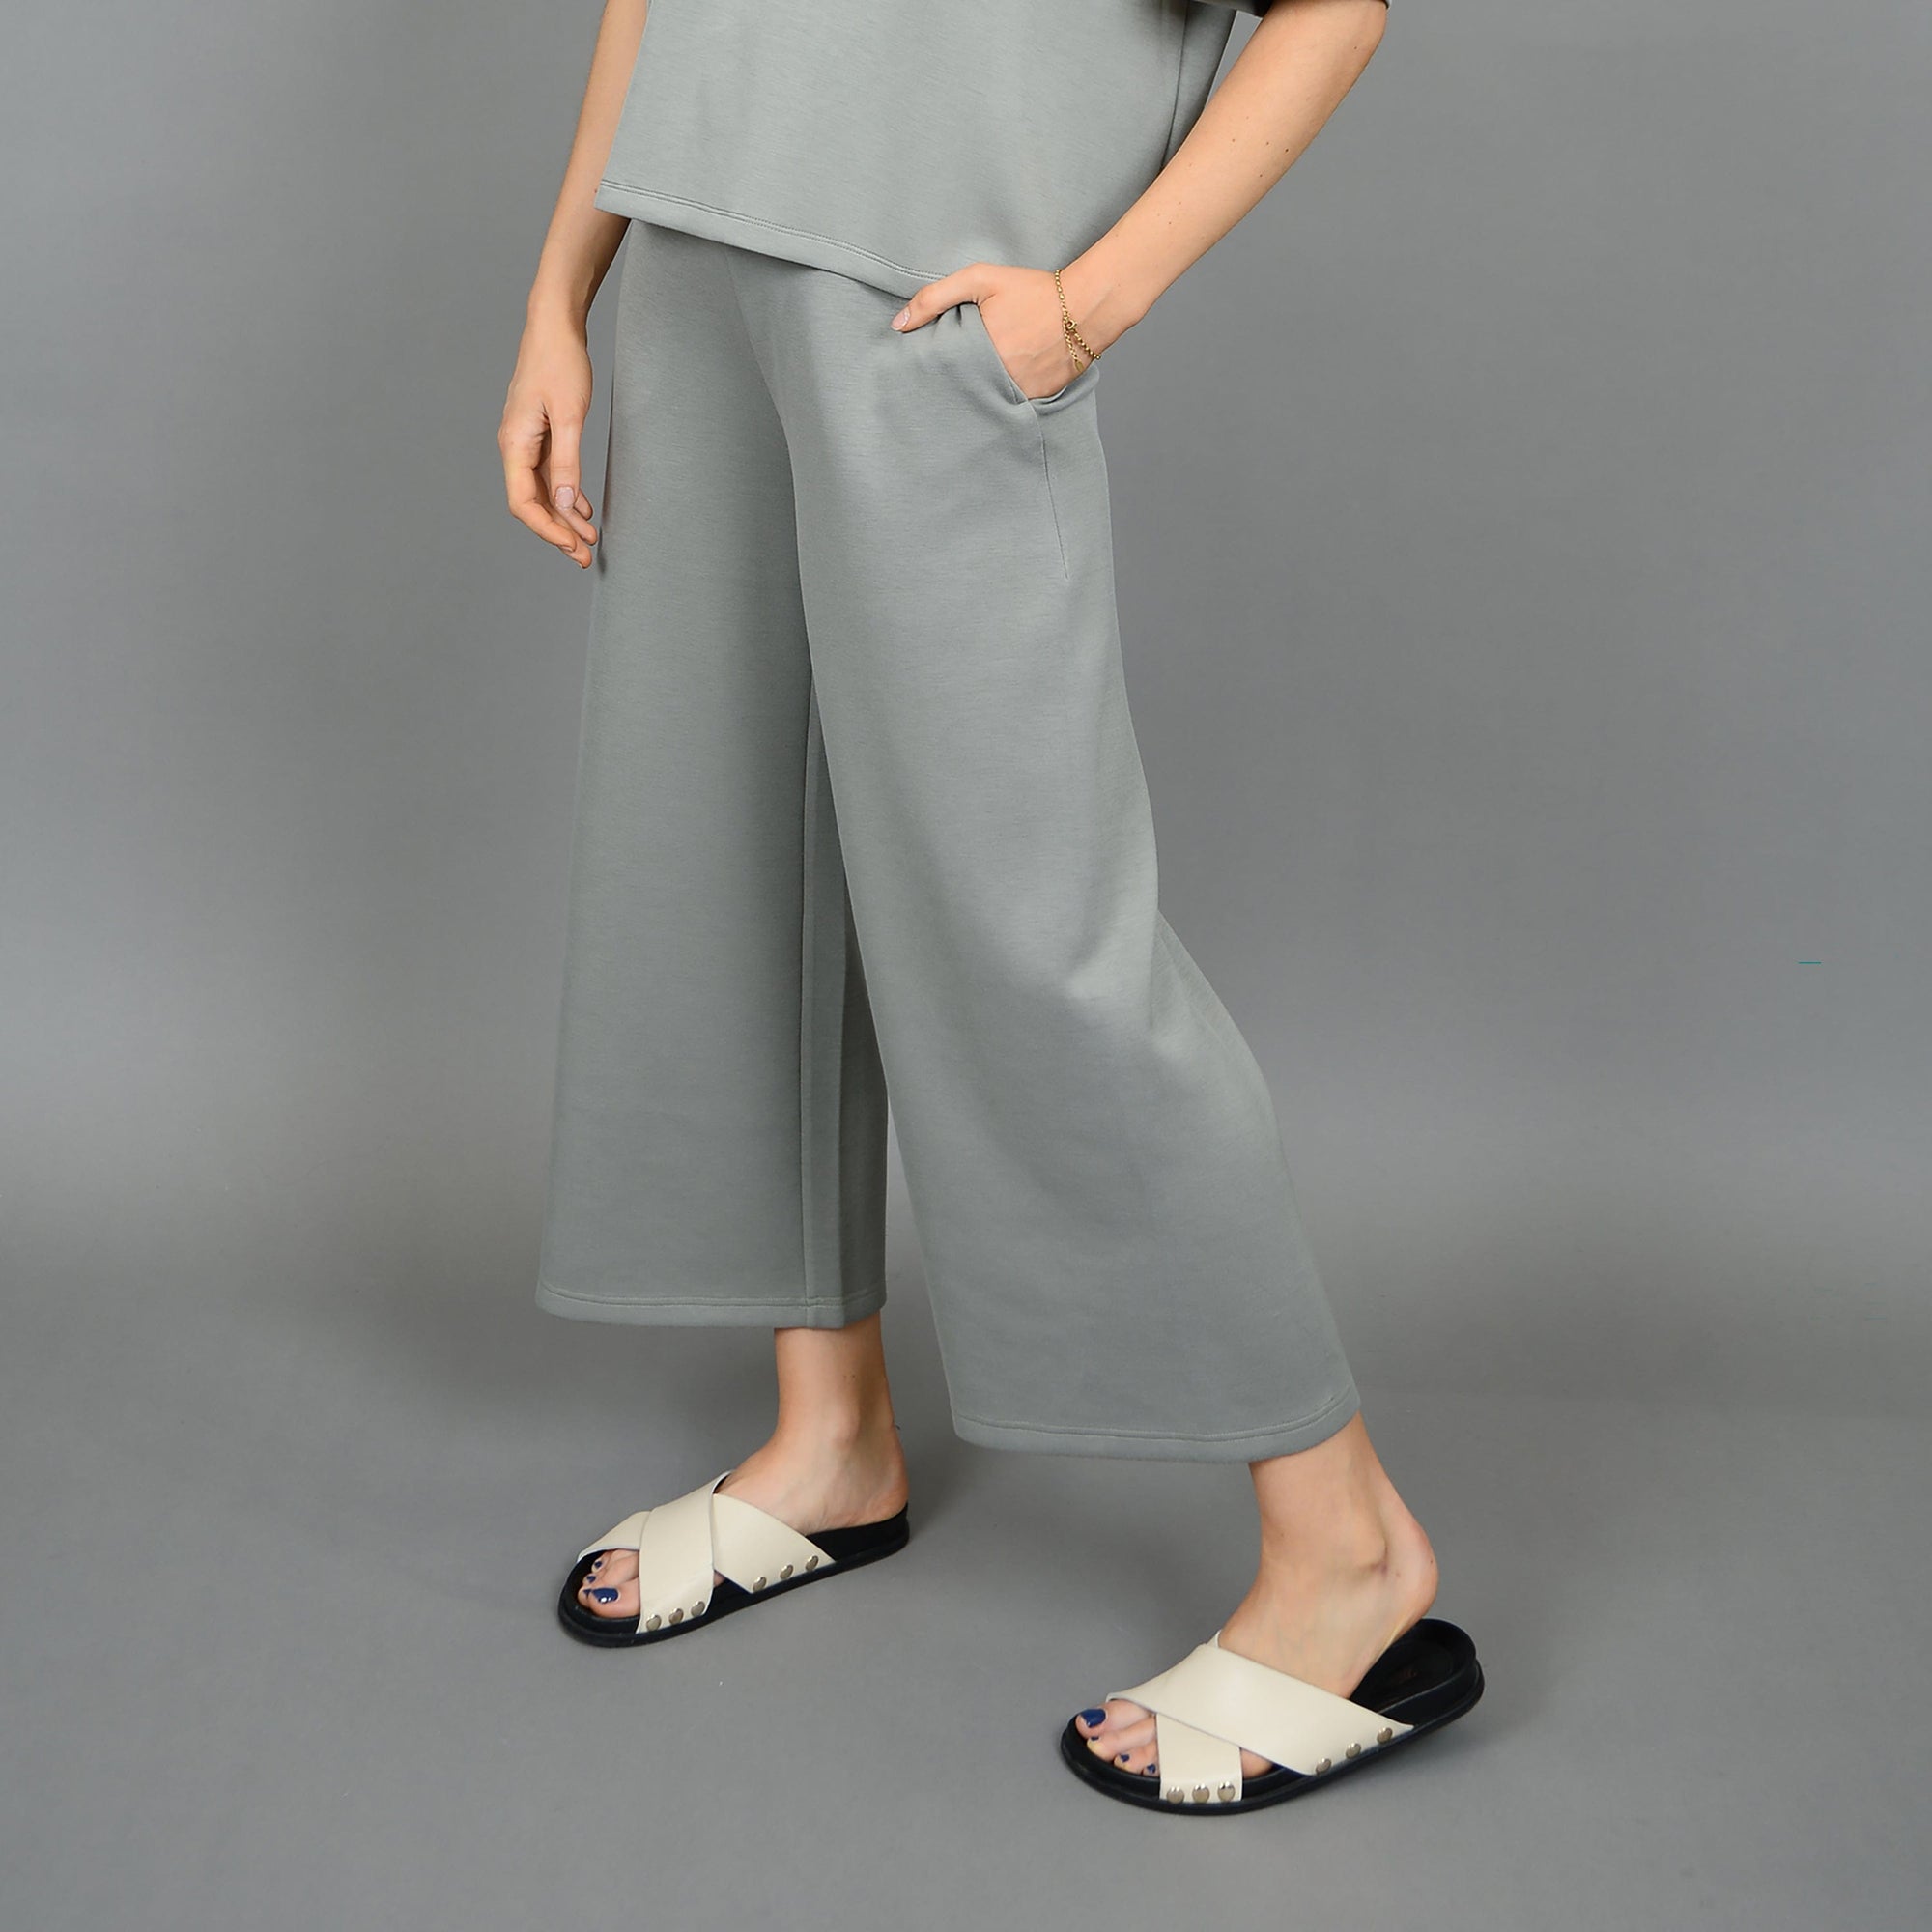 RD Stone / XS Second Skin Victoria Soft Knit Cropped Pants